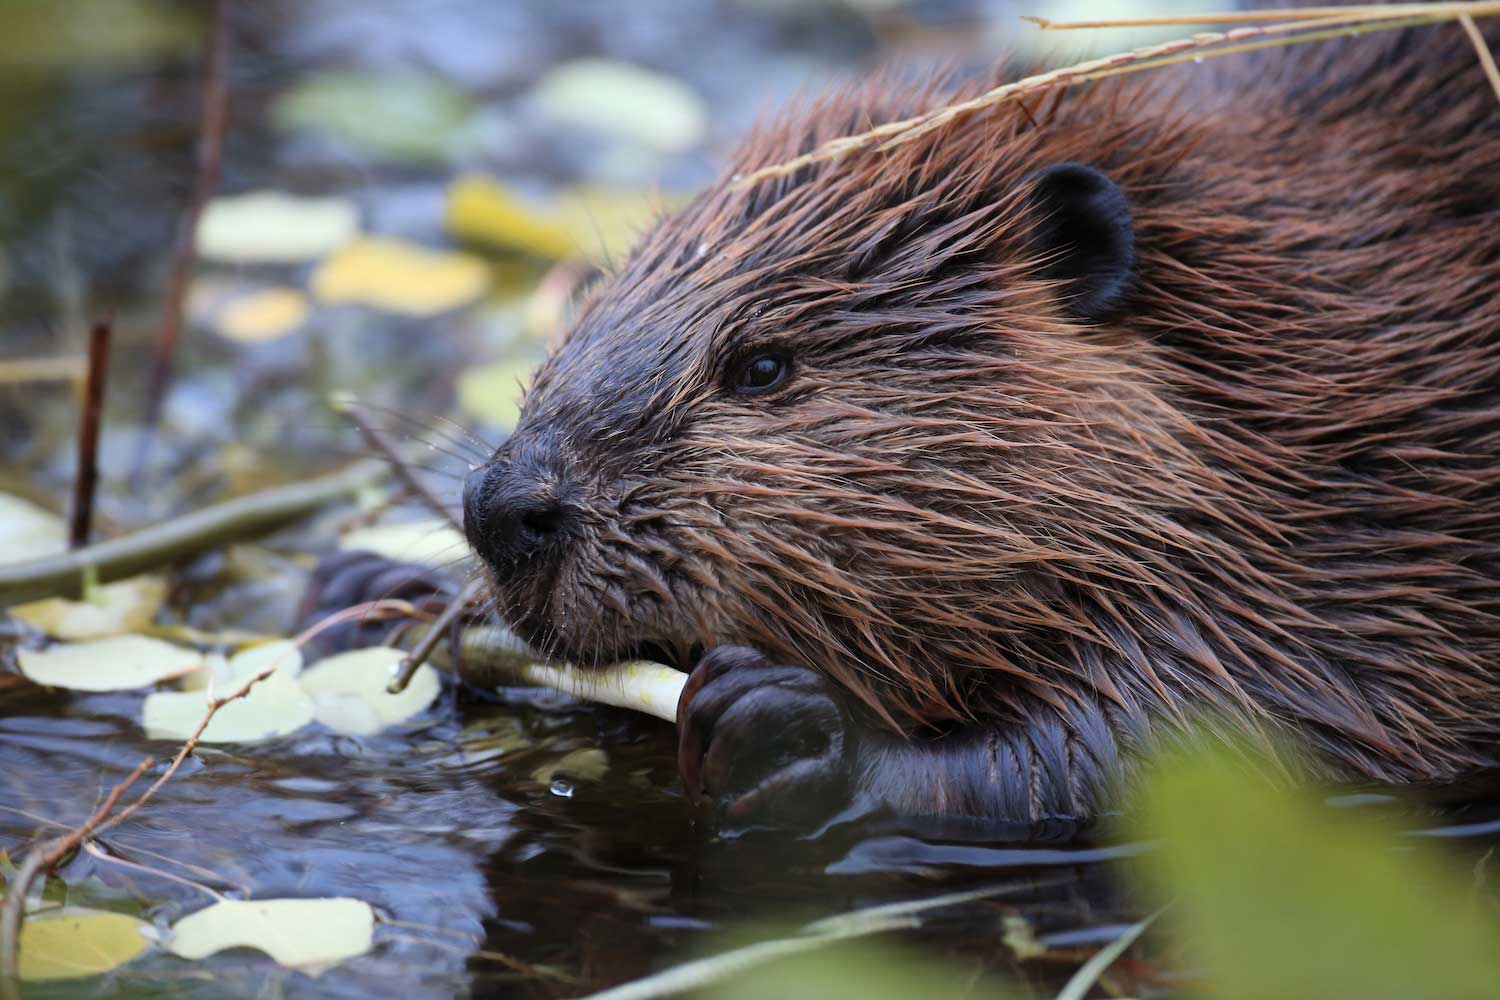 A beaver chewing on plant matter in shallow water.